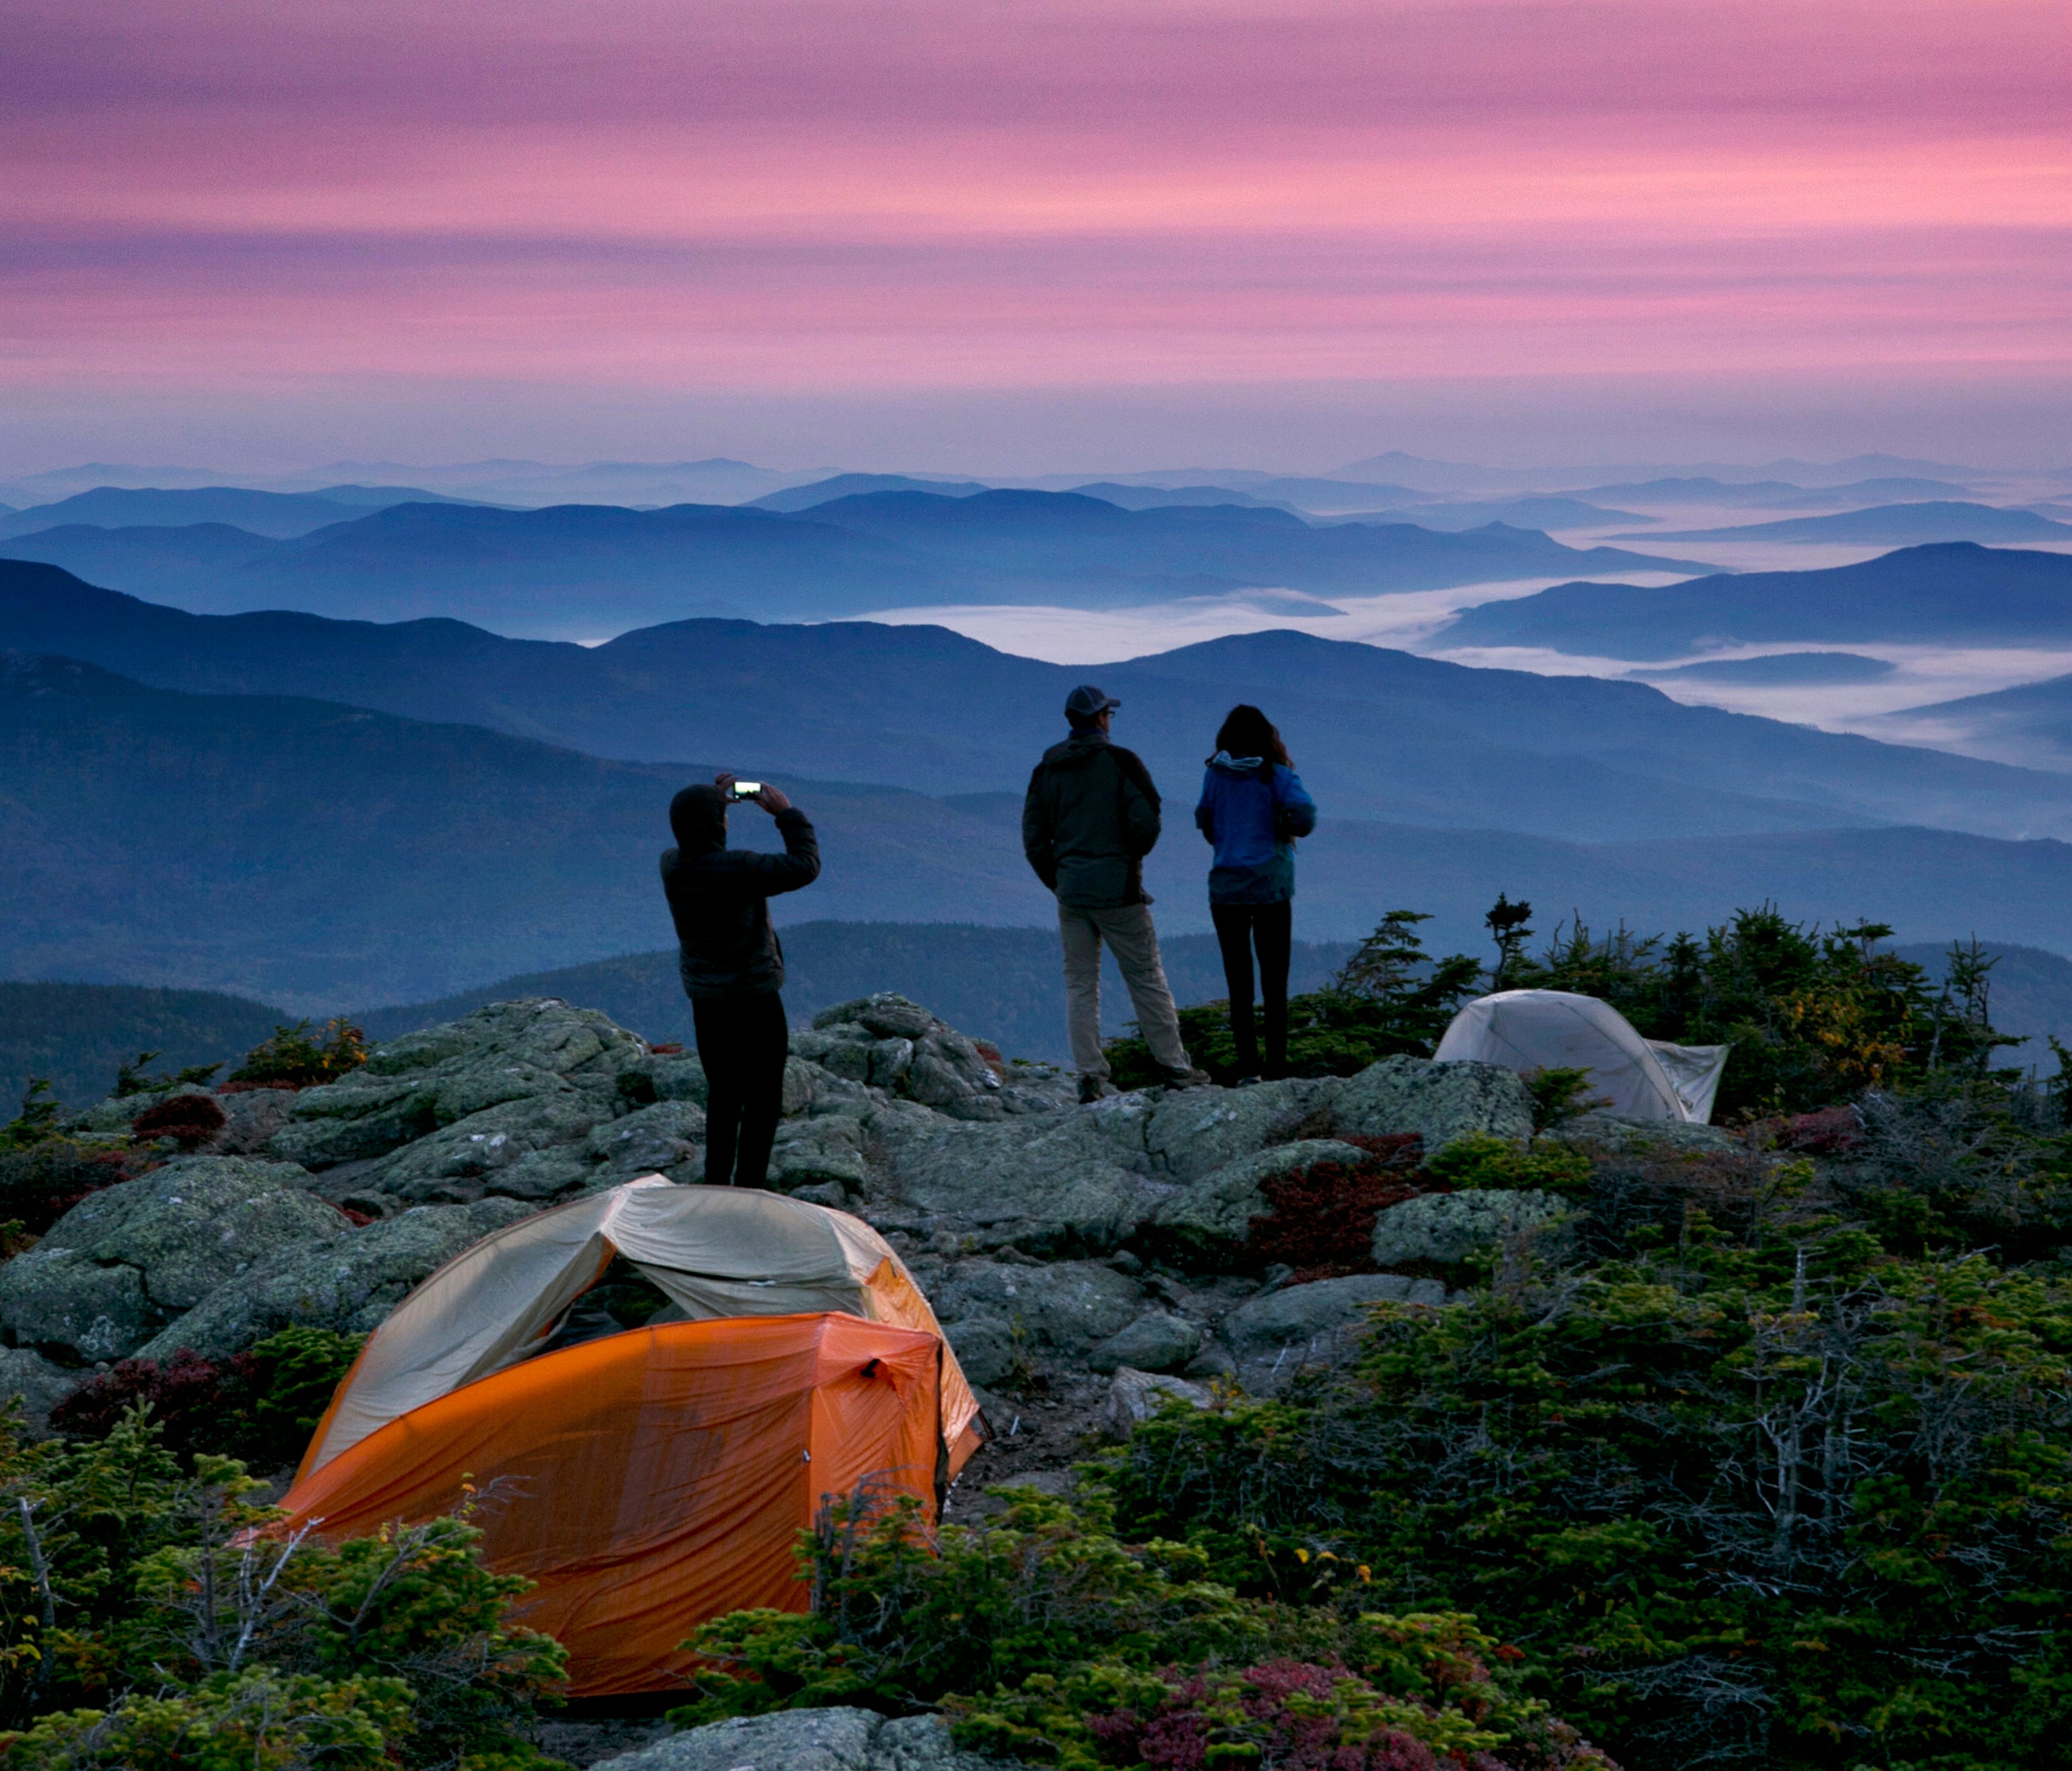 Robert Weiss photographs his brother-in-law, Matthew Ferri, and his wife, Andrea  just before sunrise from their campsite on the Appalachian Trail in Beans Purchase, N.H., Sept. 17, 2017.